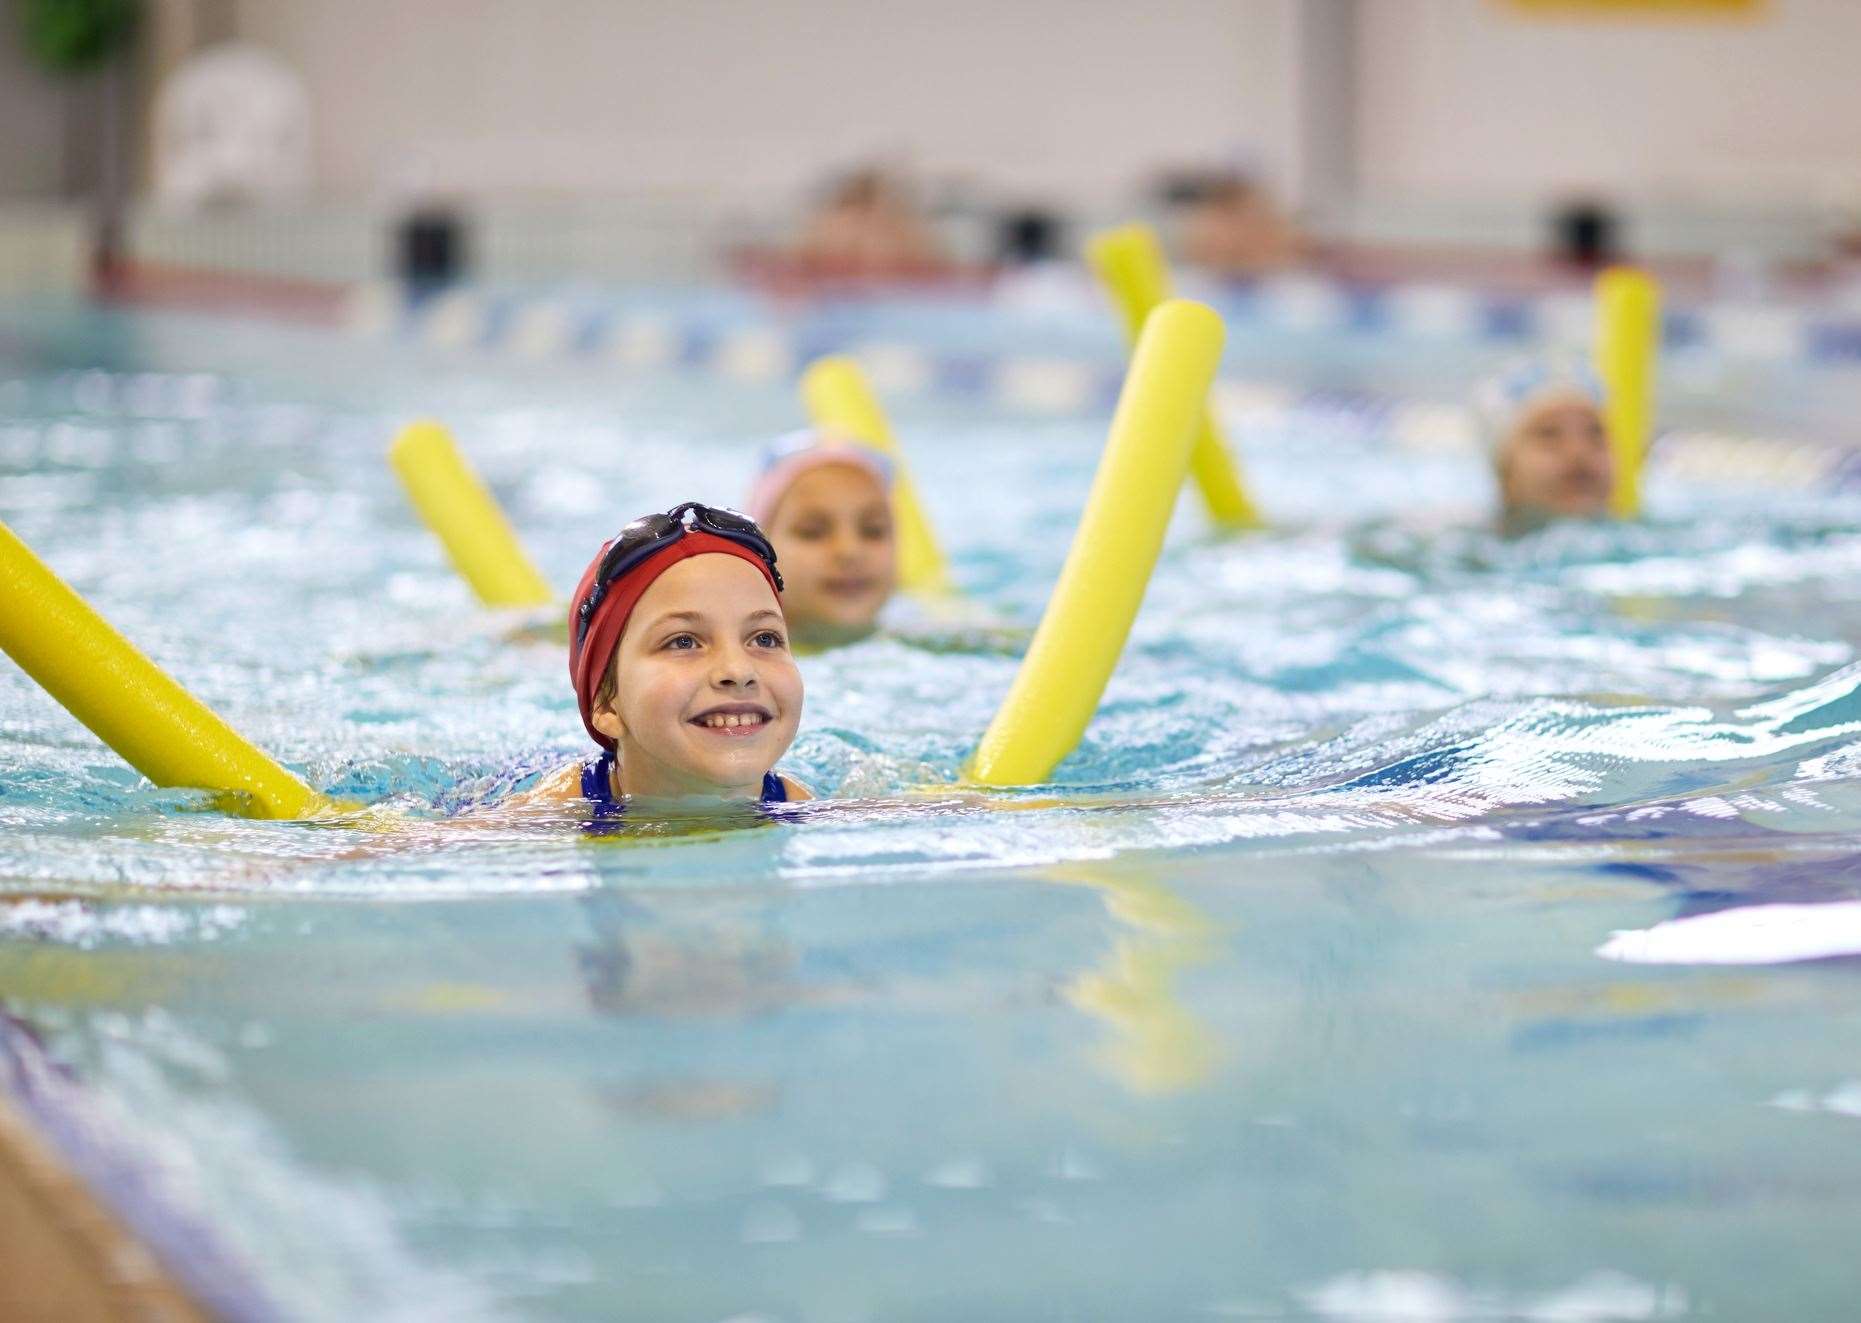 Medway Council will push ahead with its decision to axe free swimming for children. Photo: istock/SeventyFour